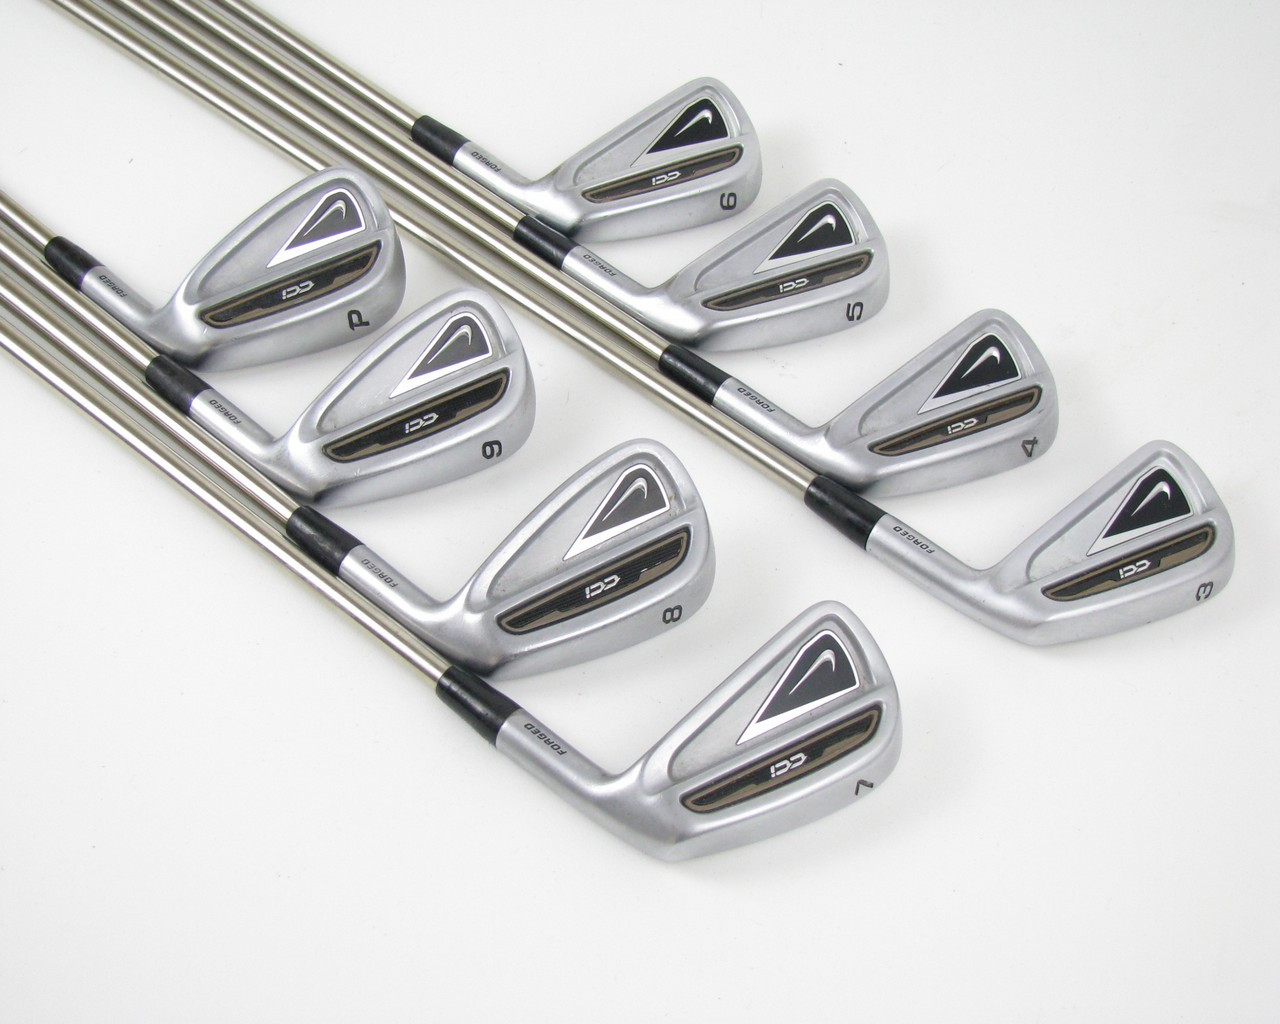 Nike CCi Forged iron set 3-PW w/ UPGRADED True Temper Black Gold Stiff Flex  (Out of Stock) - Clubs n Covers Golf